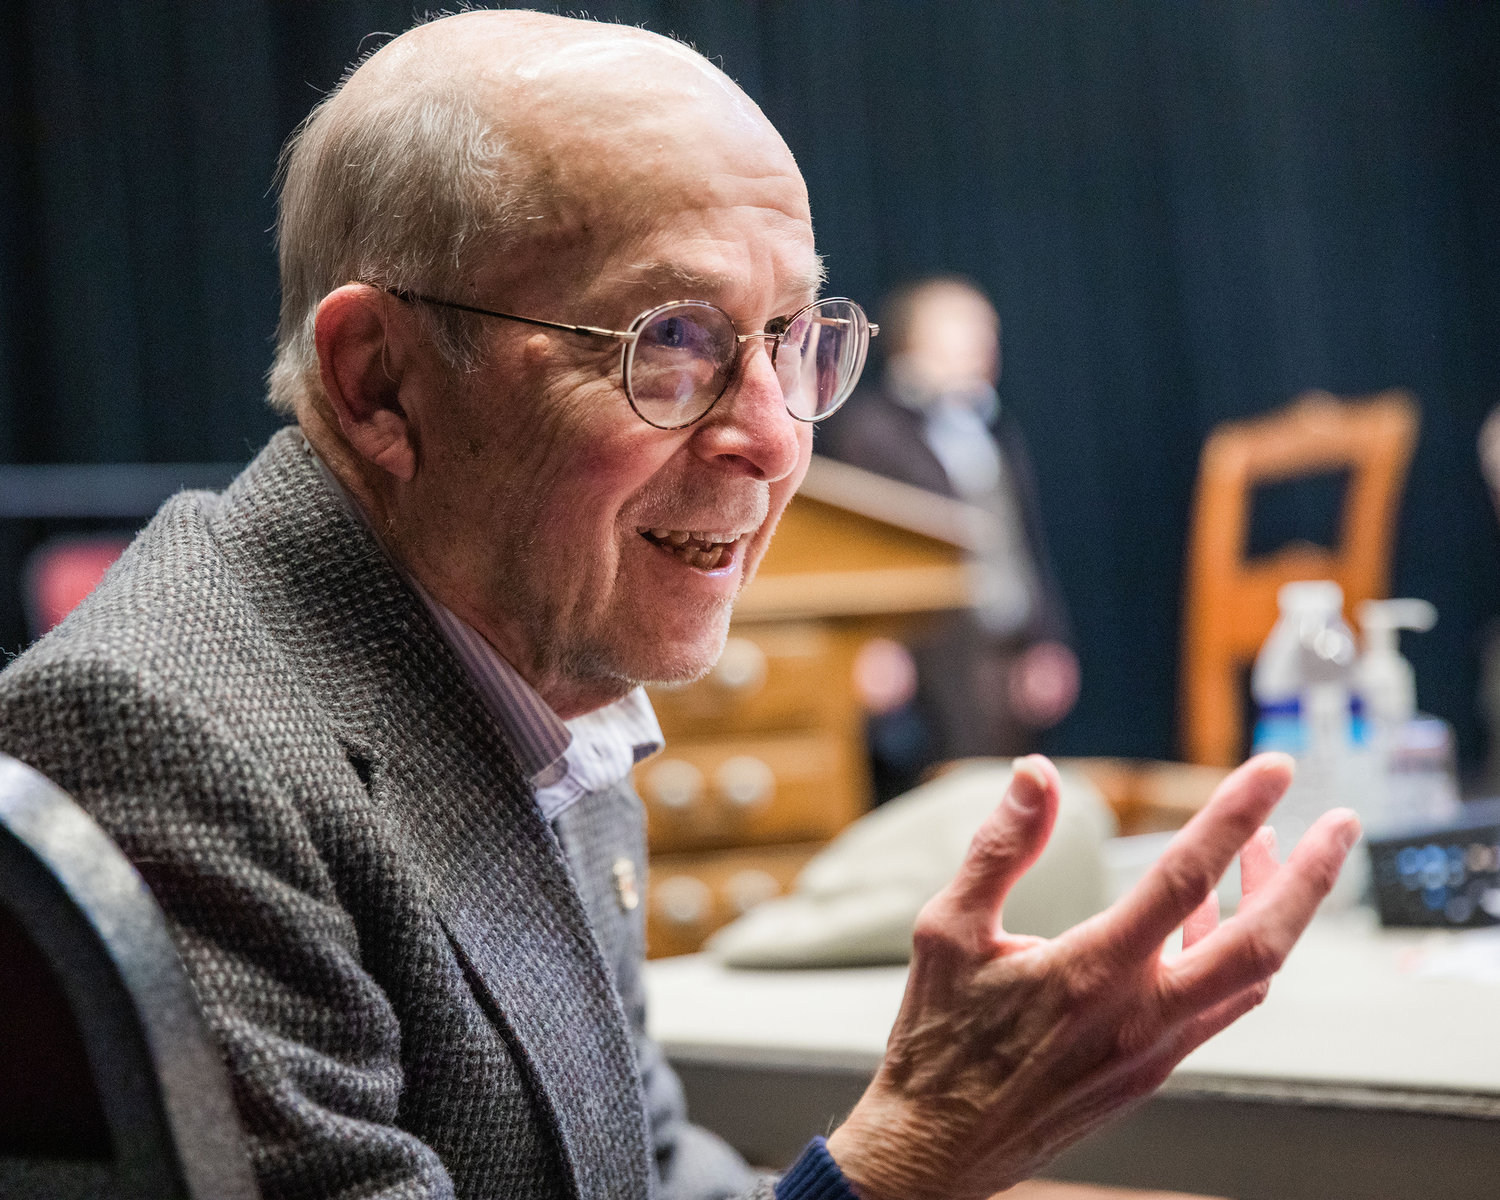 John Pratt, a professor emeritus at Centralia College, smiles while talking about his work writing “Leaving 50 Wimpole Street” Thursday afternoon inside the Phillip Wickstrom Studio Theatre.